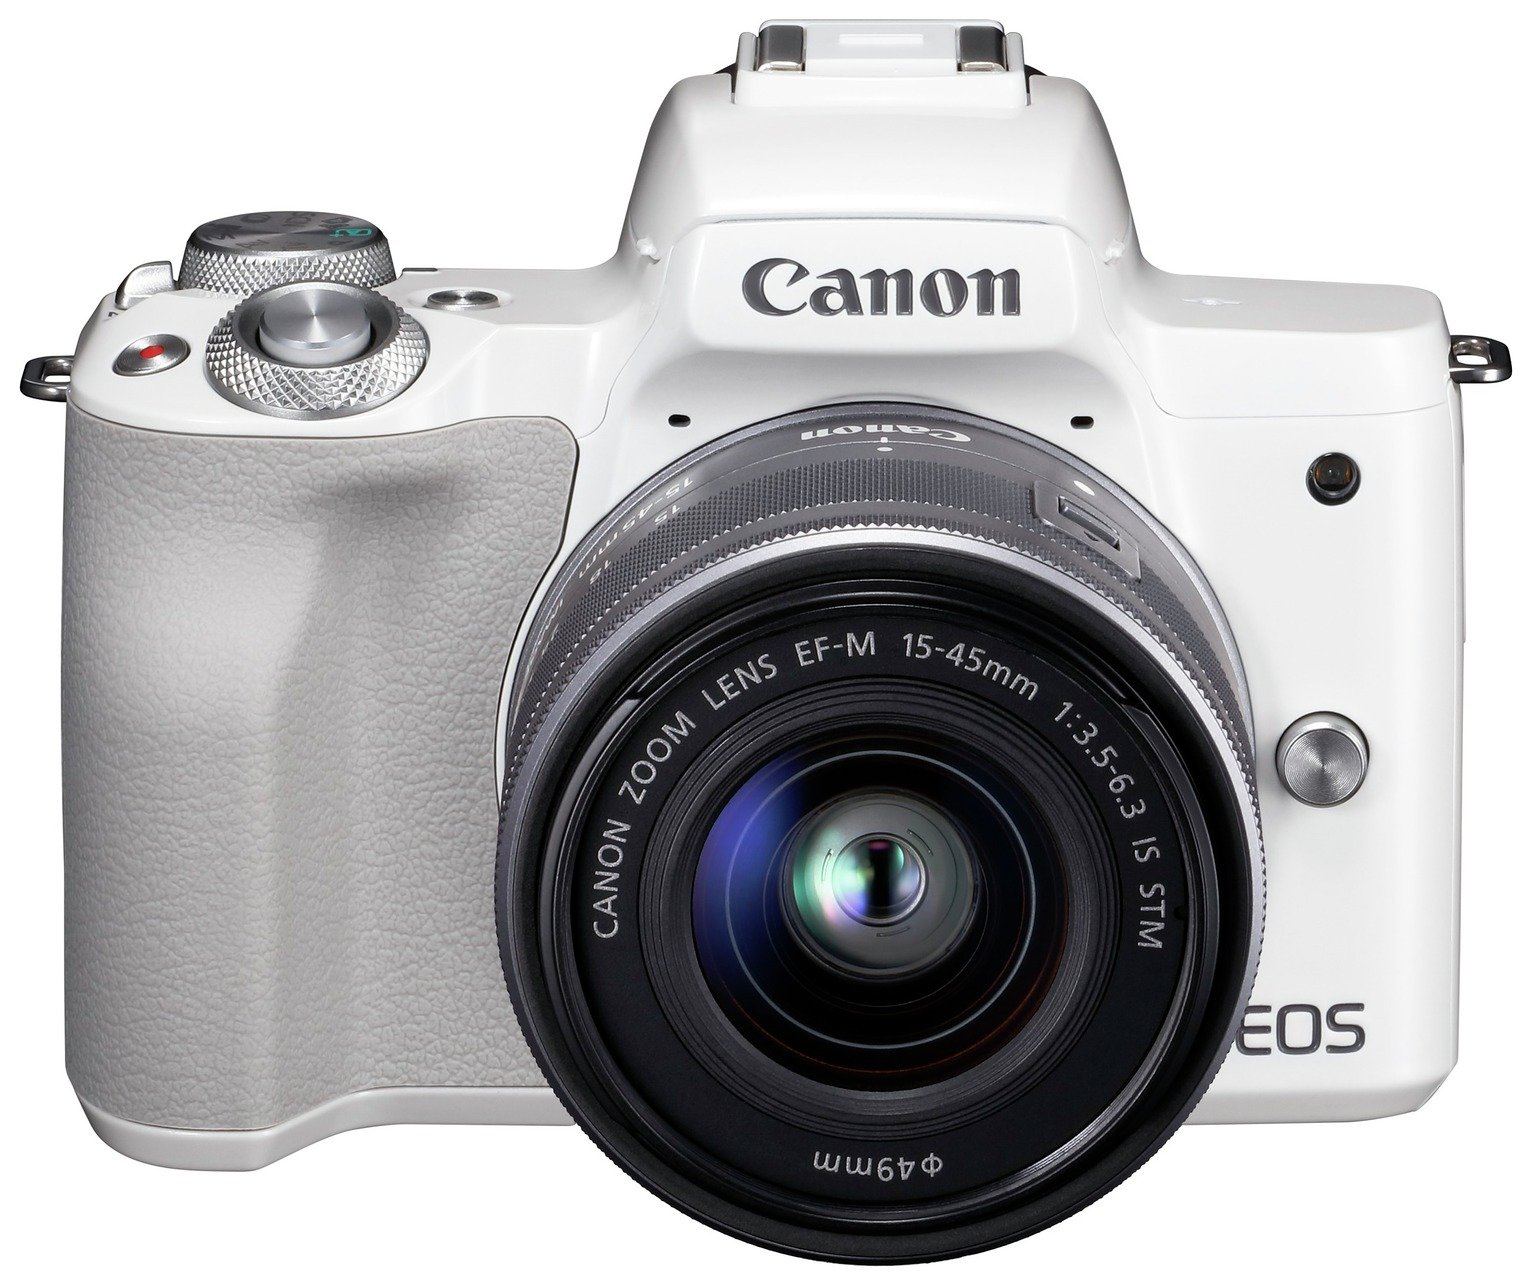 Canon EOS M50 Mirrorless Camera Body with 15-45mm Lens Review